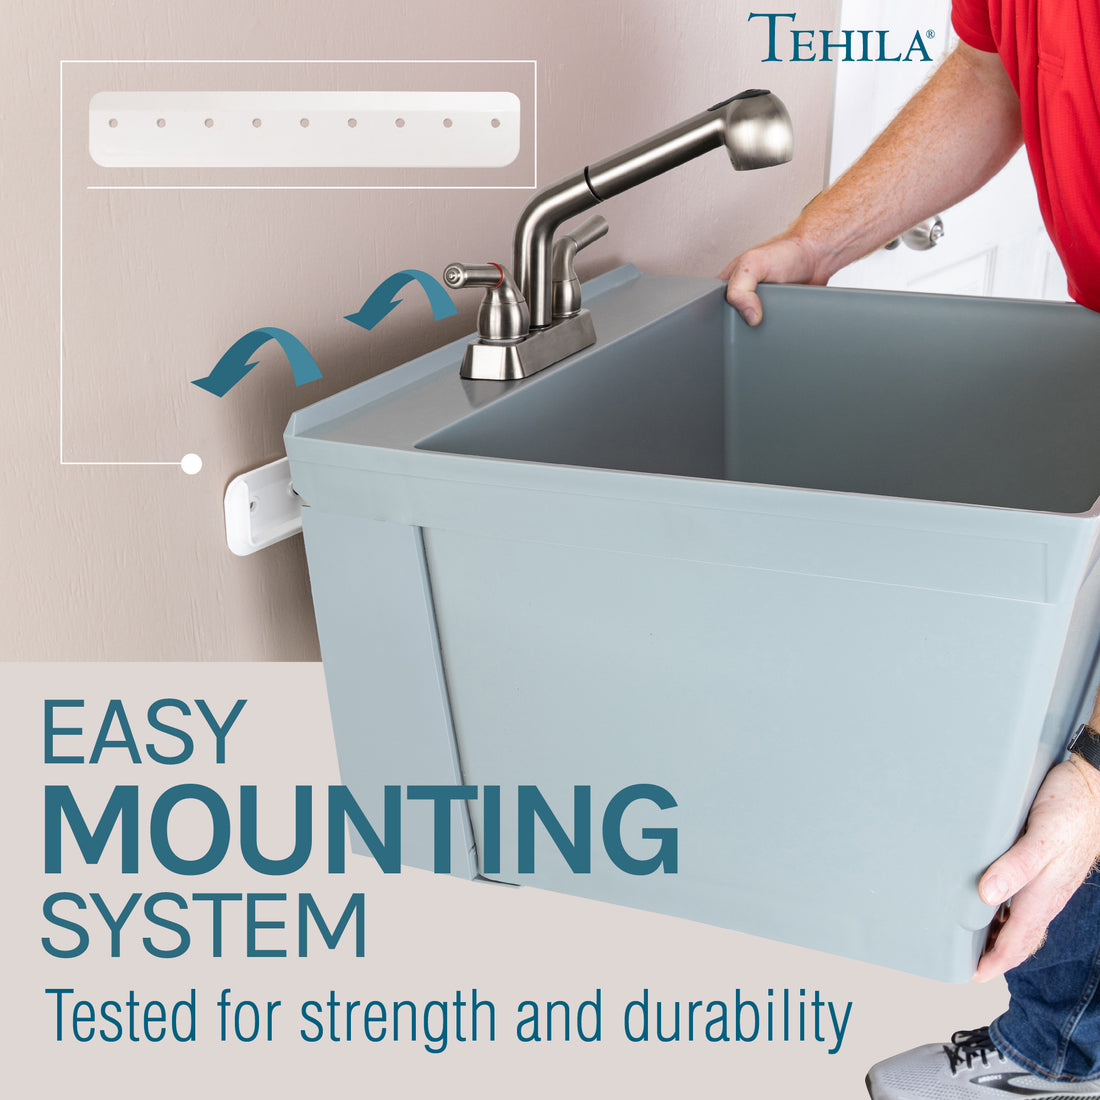 Tehila Standard Wall-Mounted Grey Utility Sink with Stainless Steel Finish Pull-Out Faucet - Utility sinks vanites Tehila